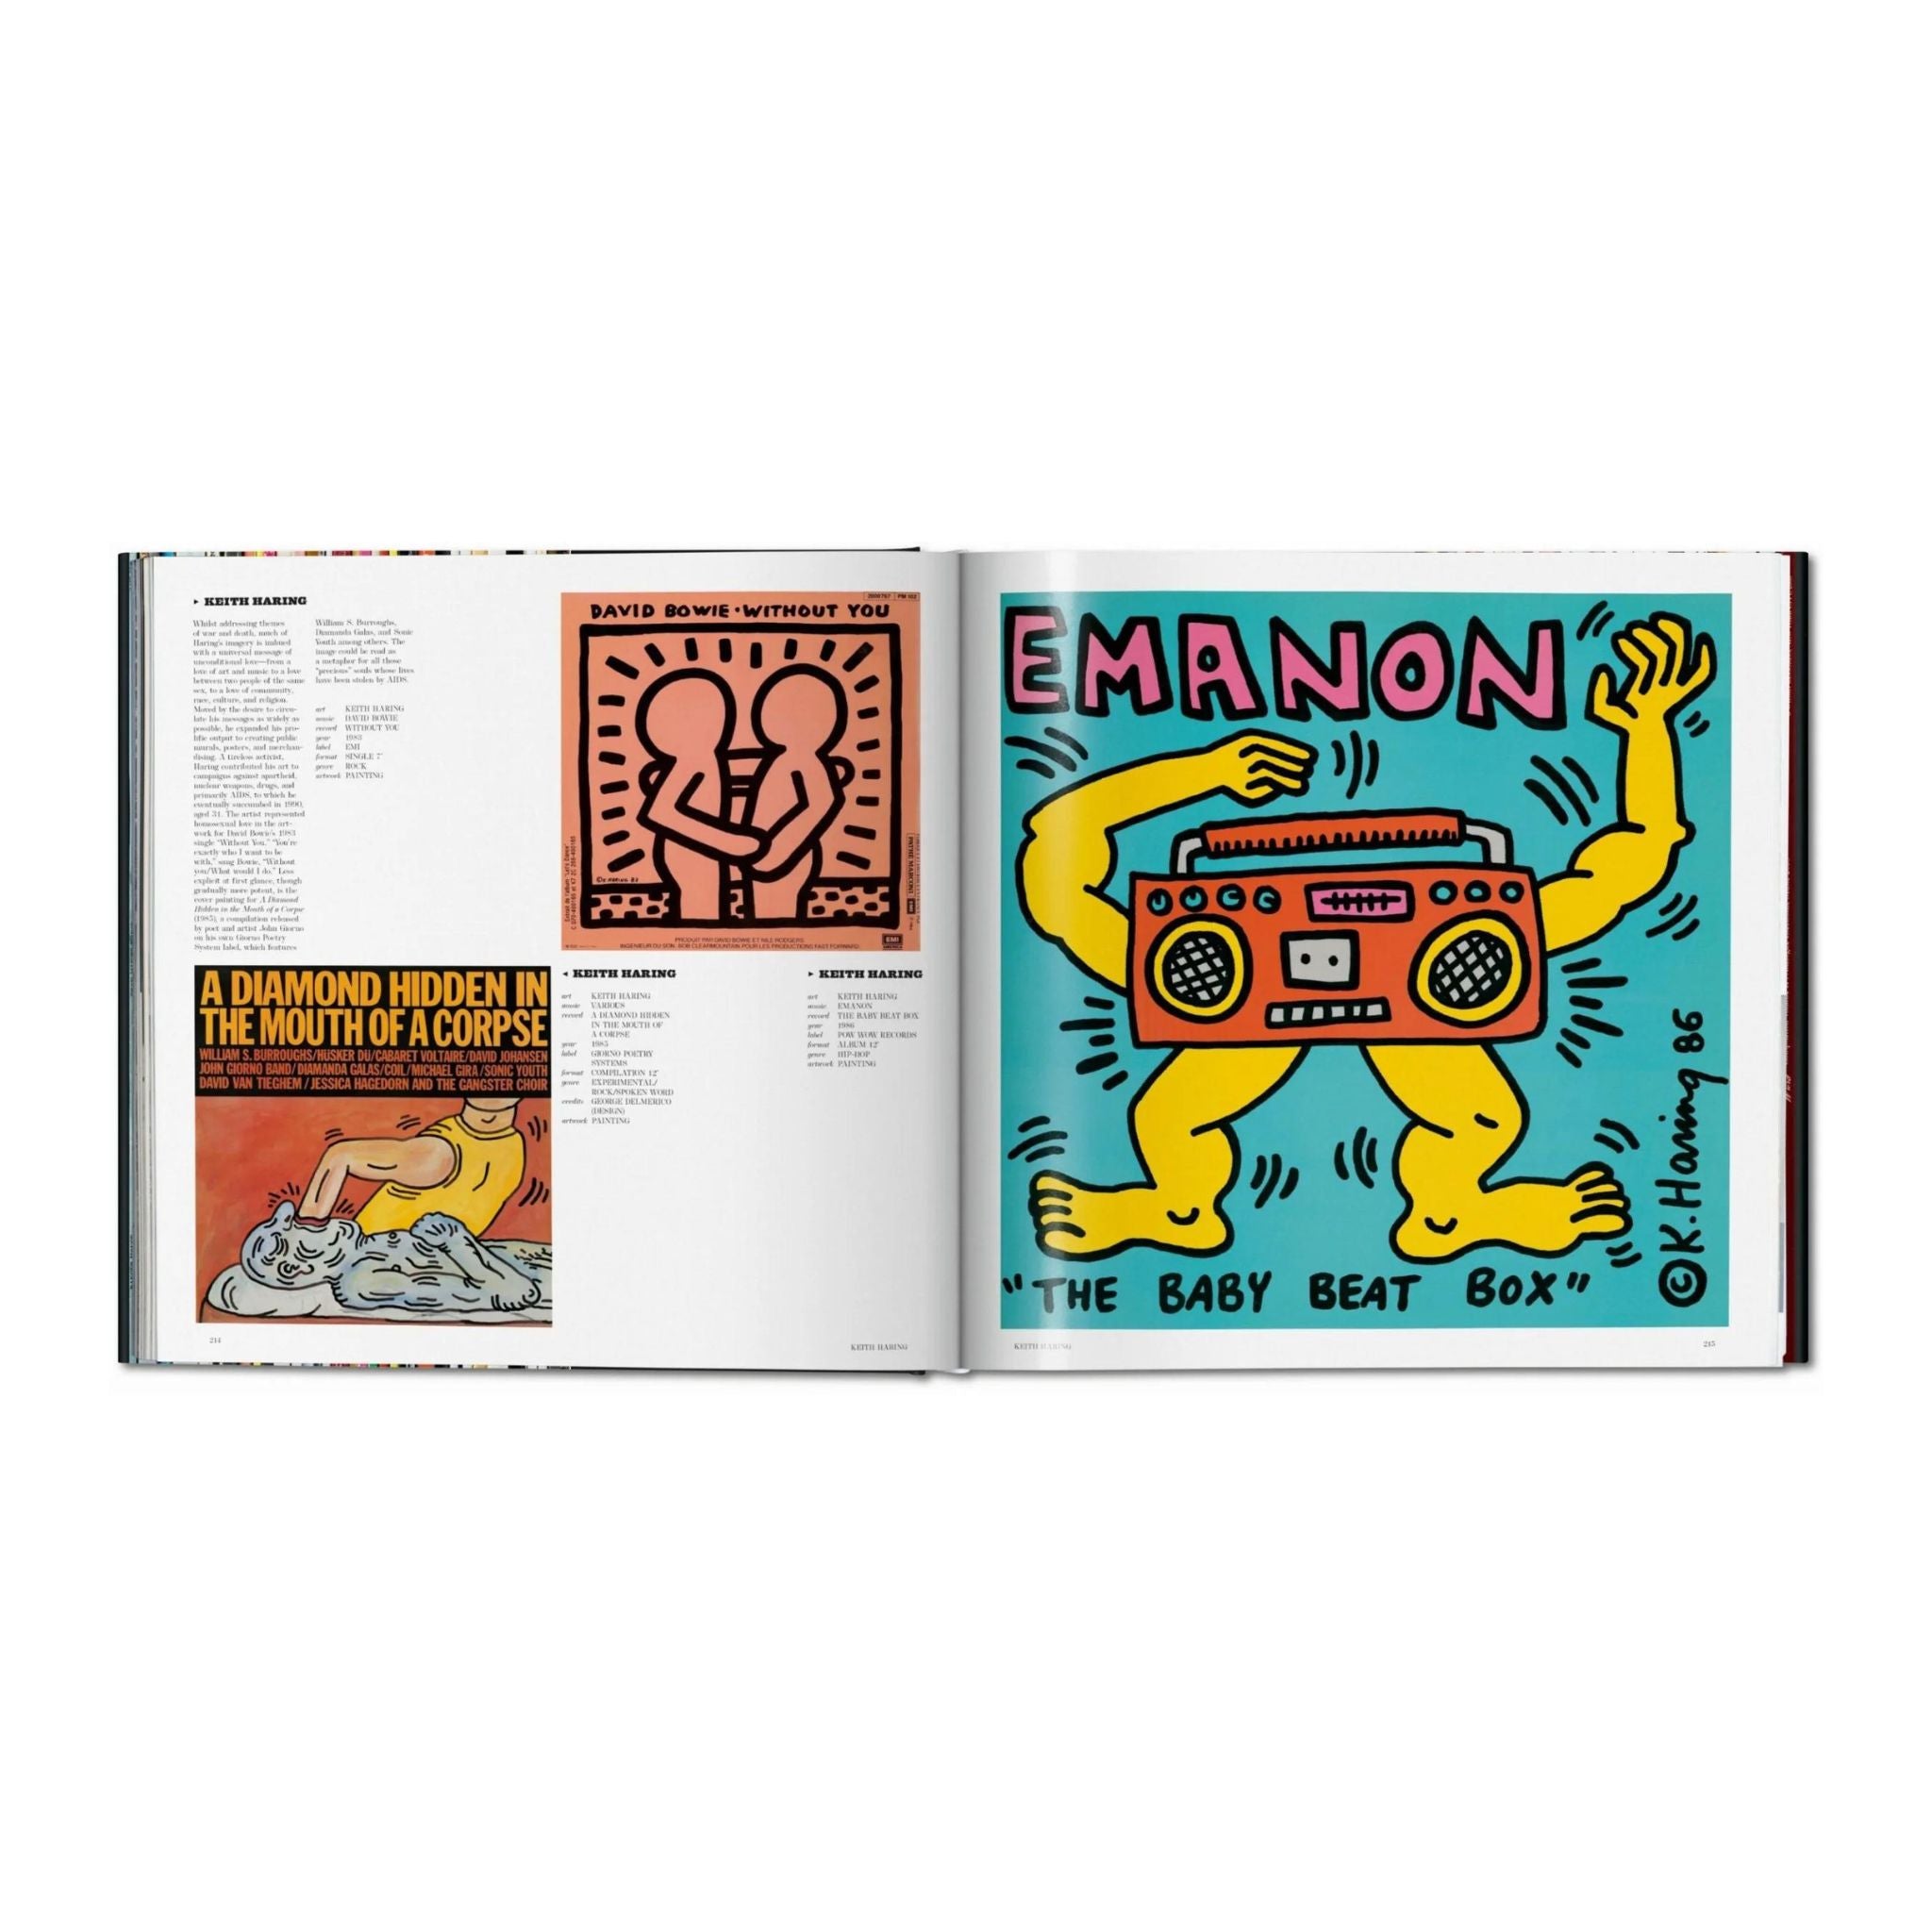 Art history acquires a new rhythm in this unique anthology of artists’ record covers from the 1950s to today. More than 500 covers trace the interaction of music and visual art through modernism, Pop Art, conceptual practice, and beyond. Simply Elevated 